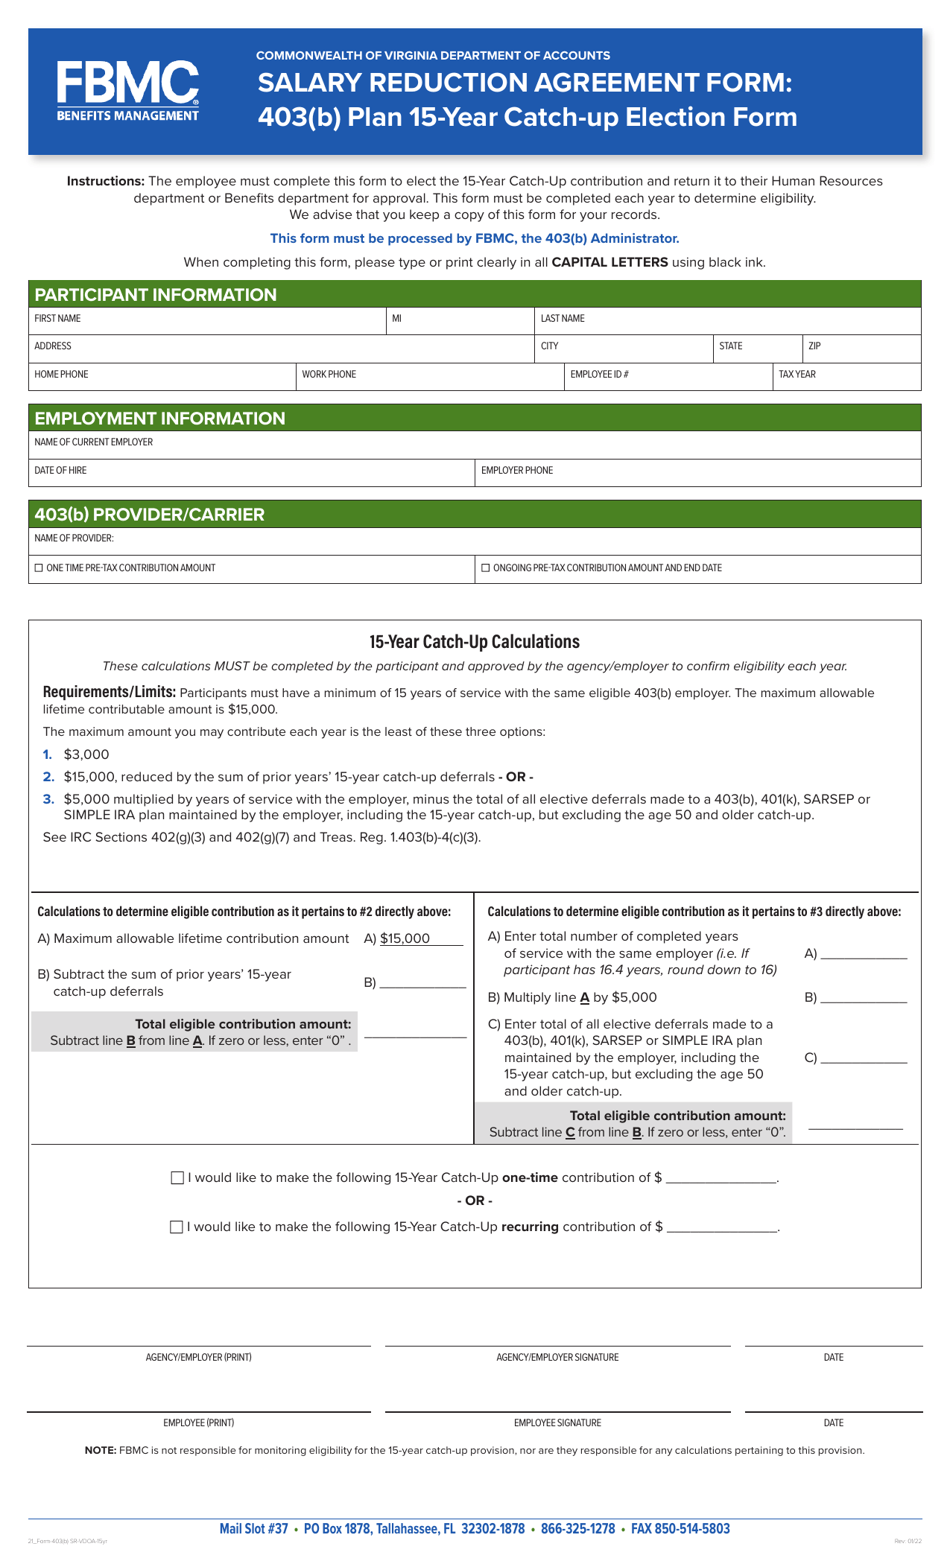 Salary Reduction Agreement Form: Plan 15-year Catch-Up Election Form - Virginia, Page 1